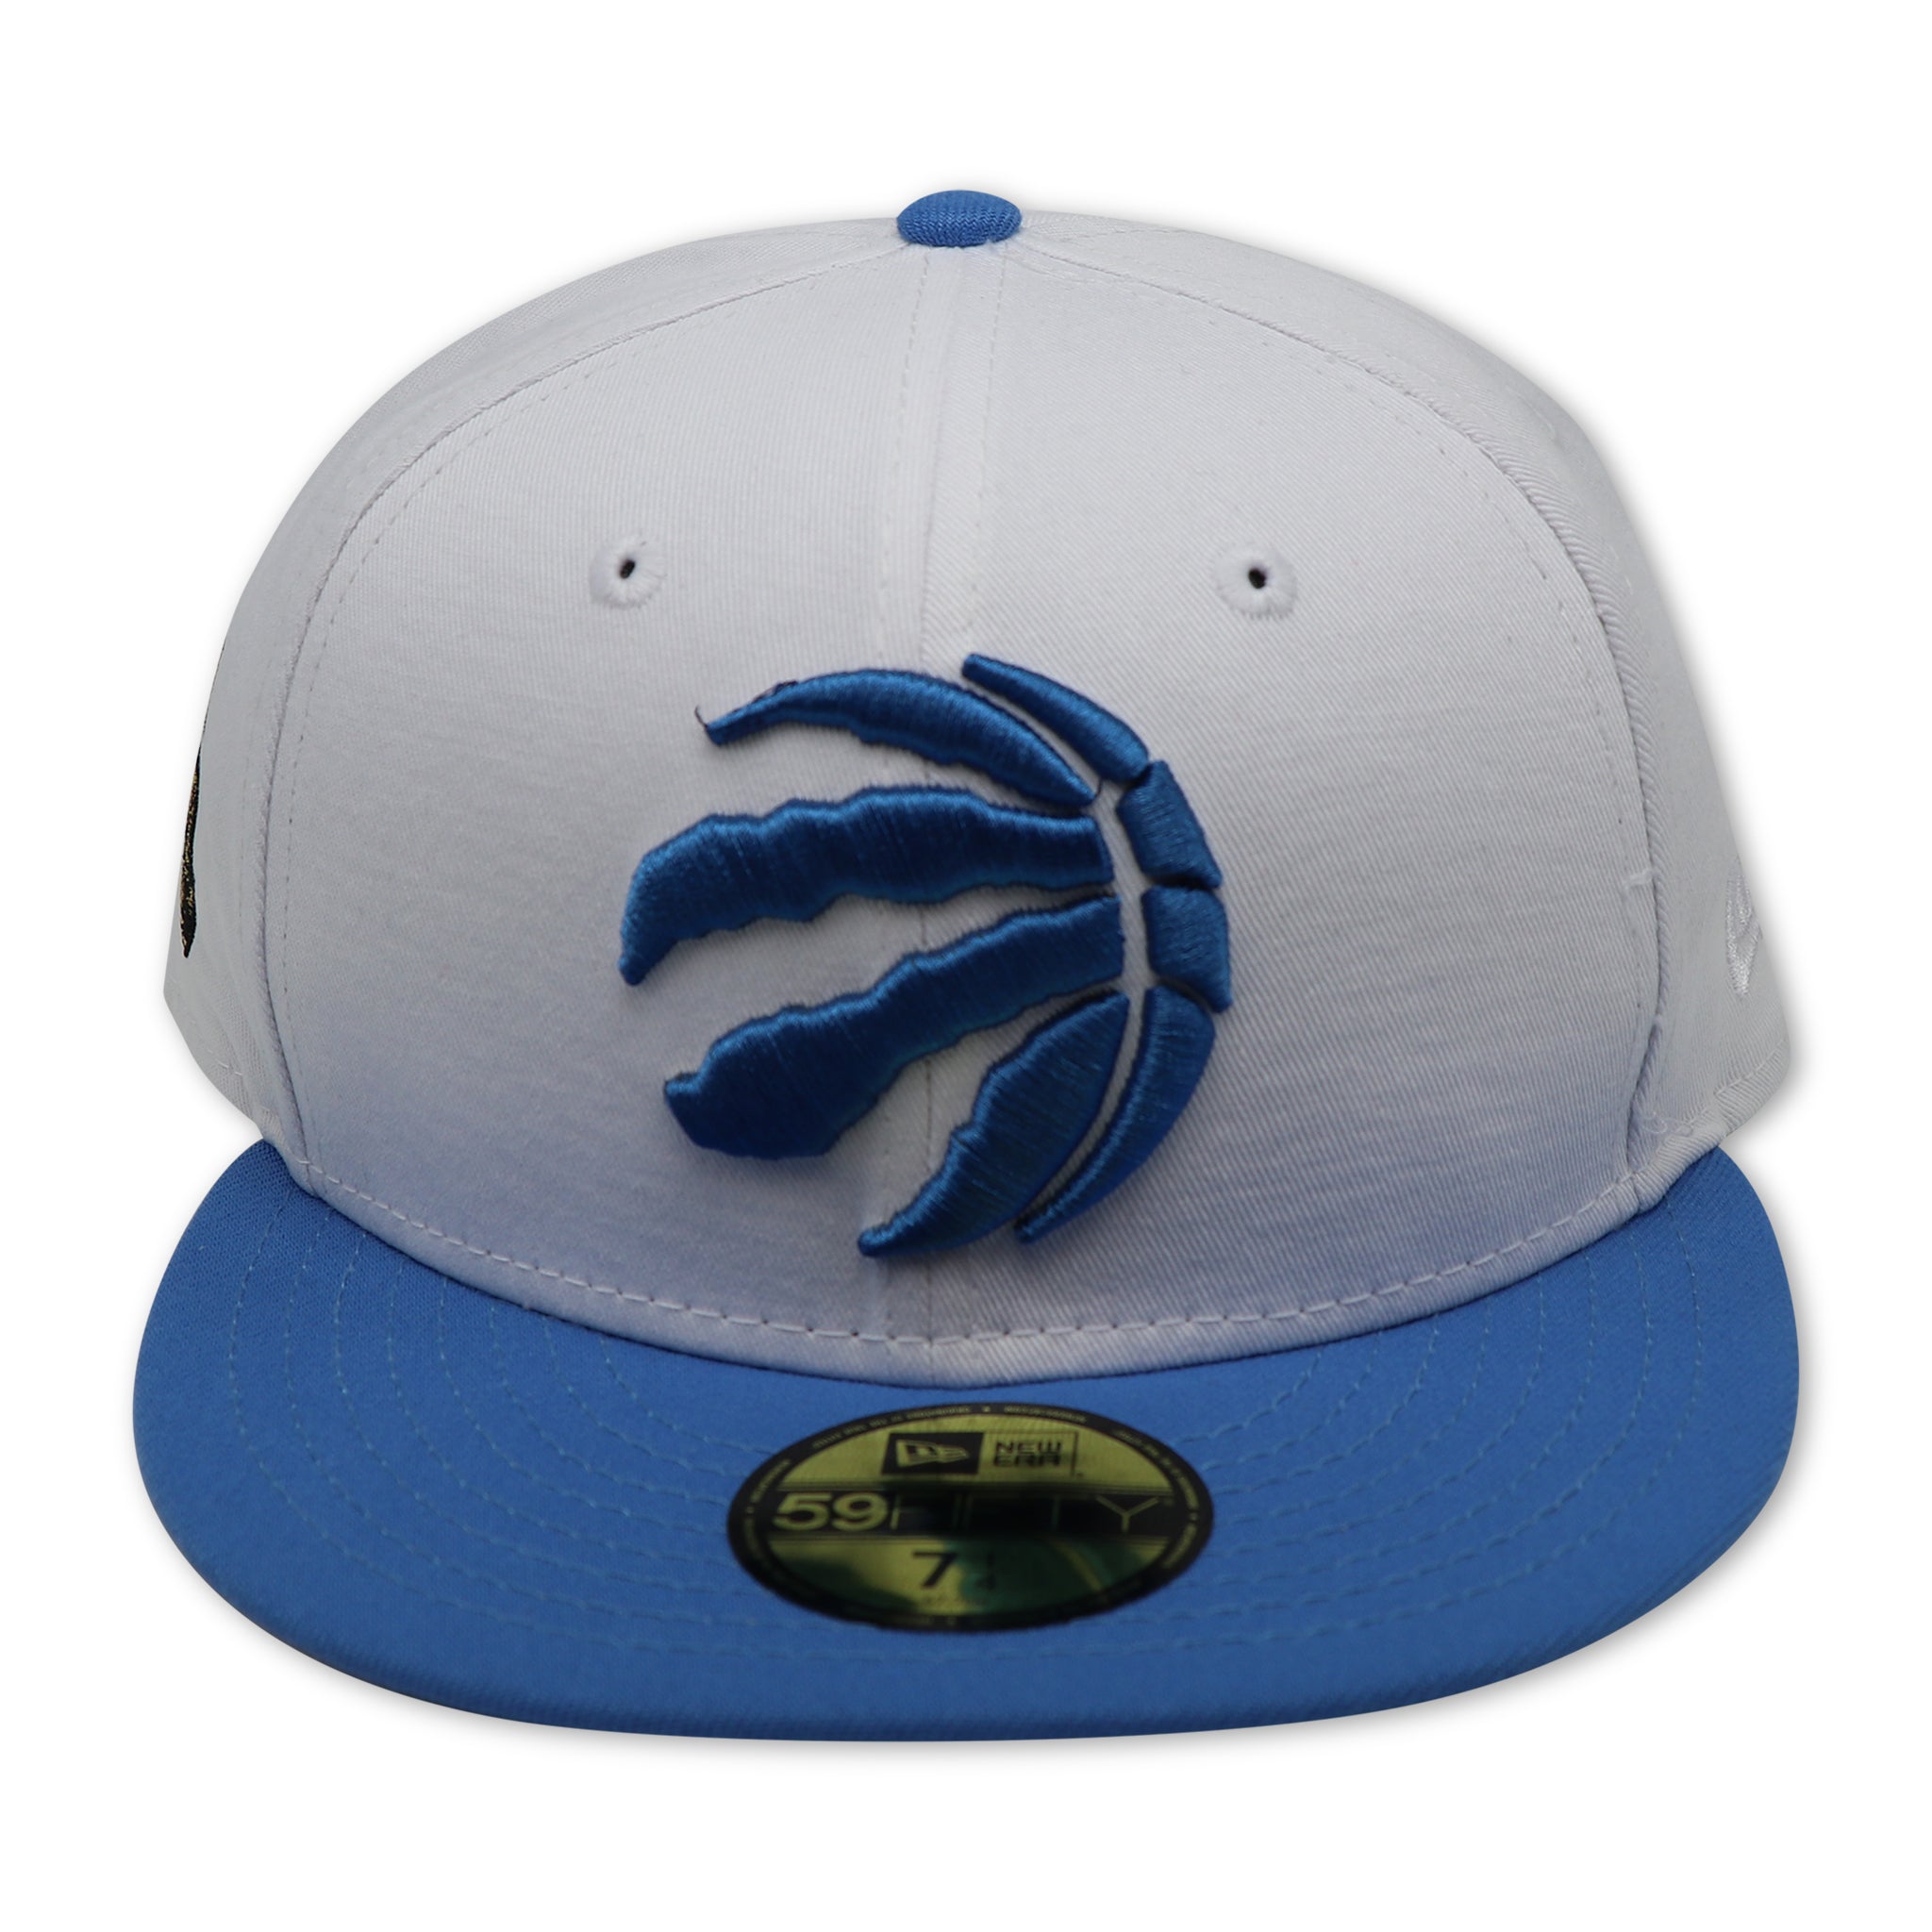 TORONTO RAPTORS (2-TONE) NEW ERA 59FIFTY FITTED (AT&T)